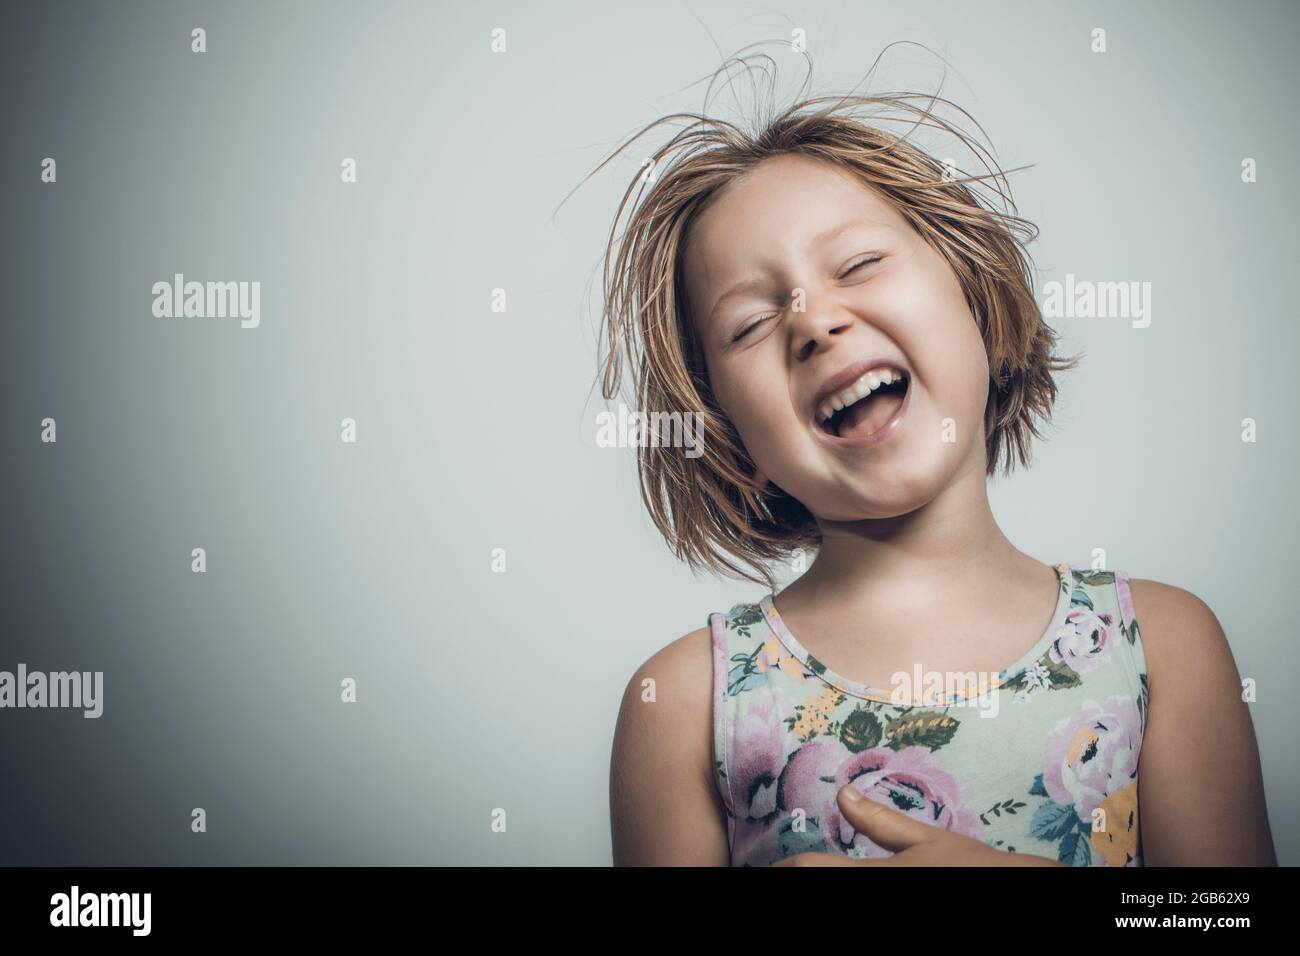 caucasian little girl with short hair laughing carefree. studio portrait Stock Photo